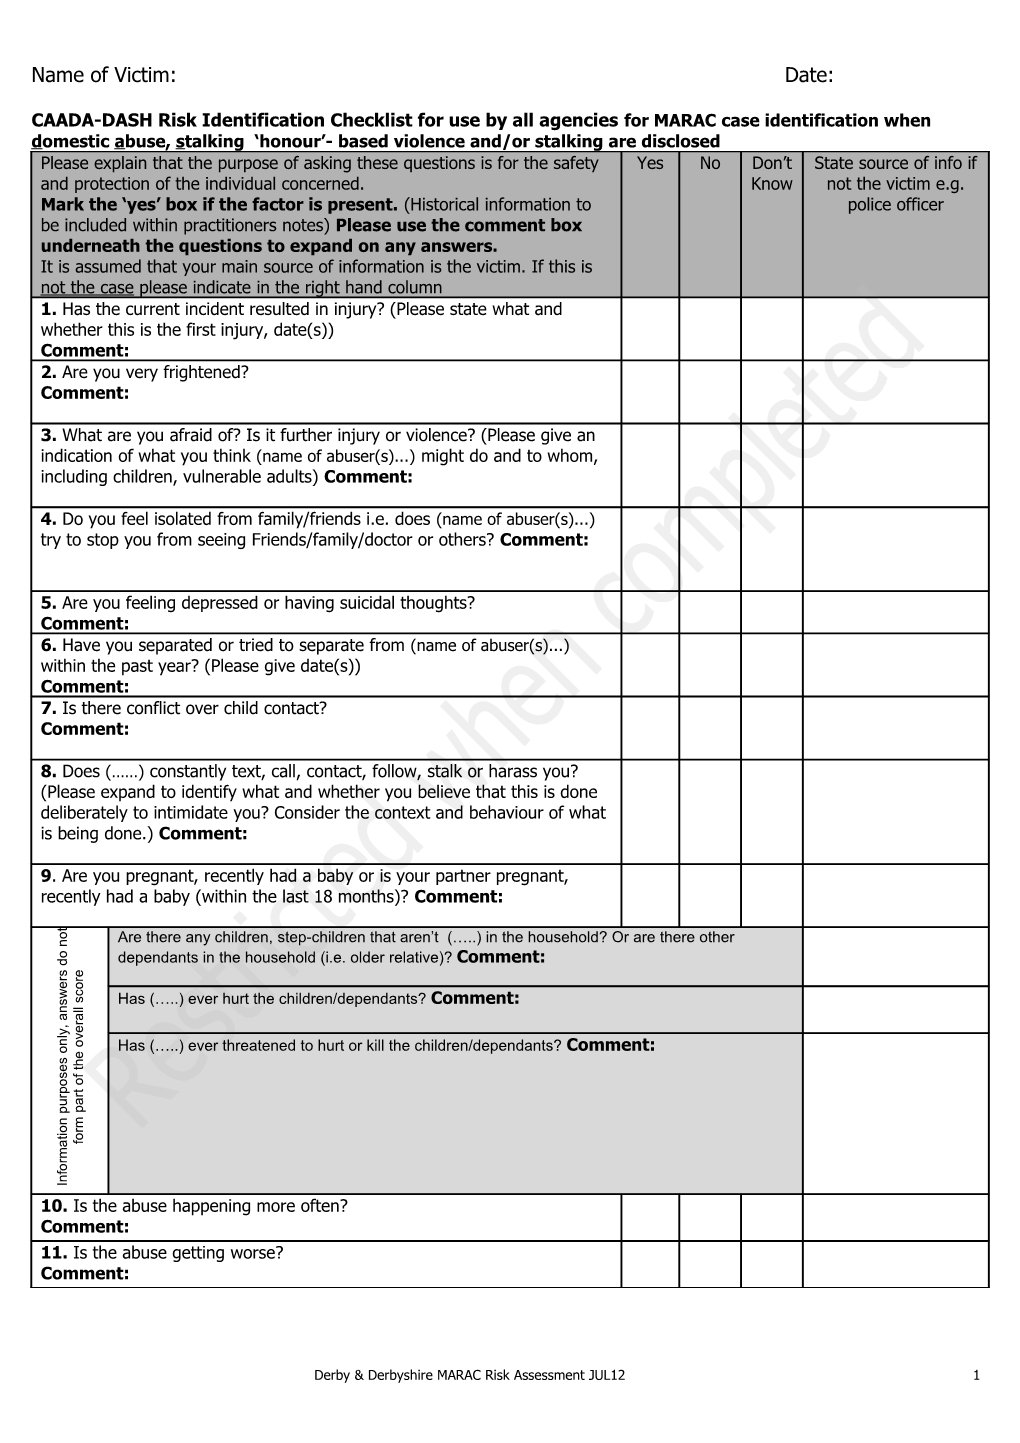 Risk Indicator Checklist for Use by Idvas and Other Non-Police Agencies4 for MARAC Case